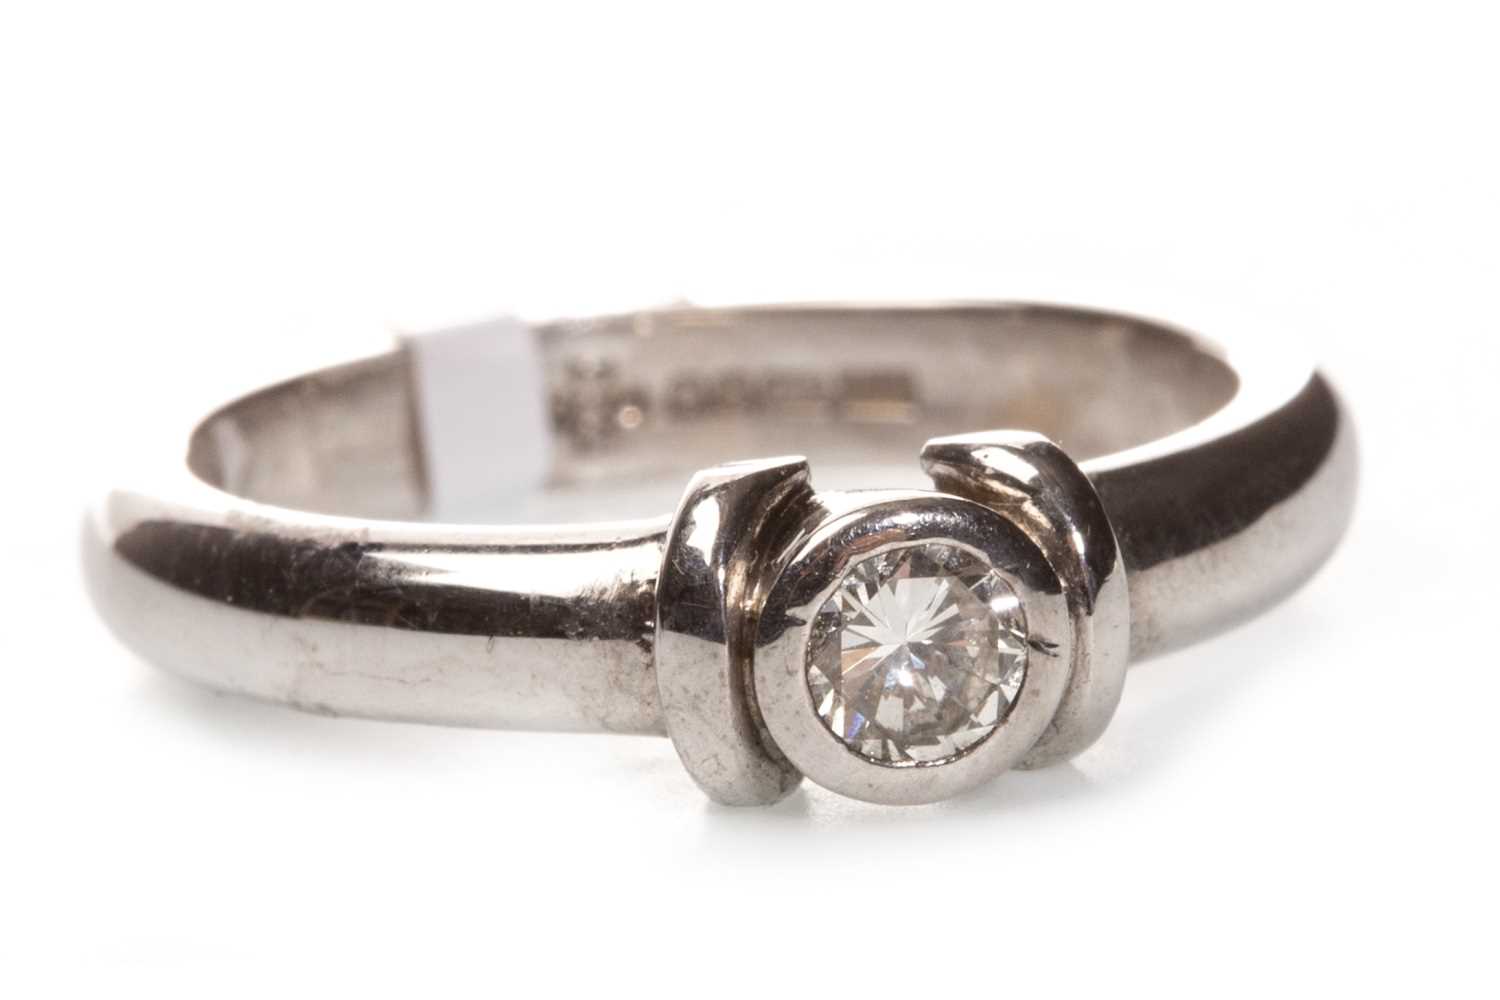 Lot 47 - A DIAMOND SOLITAIRE RING